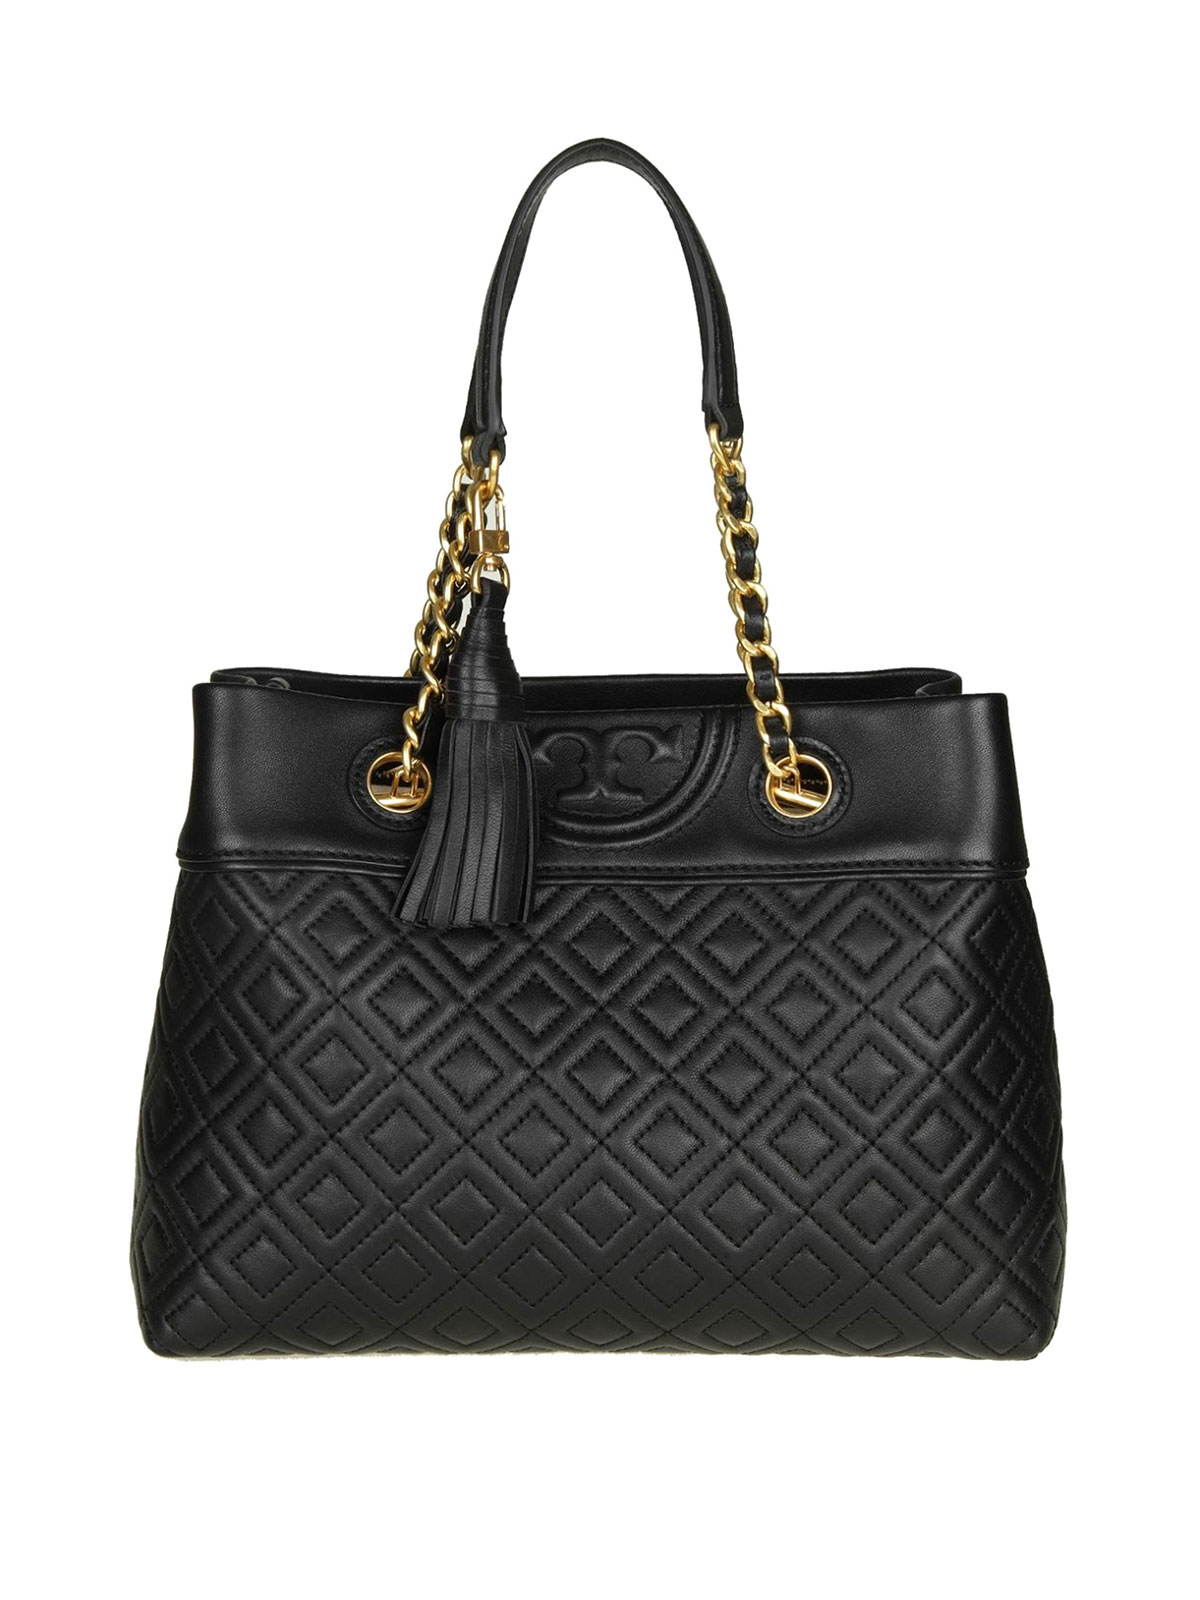 Tory Burch Fleming Small Leather Shoulder Bag